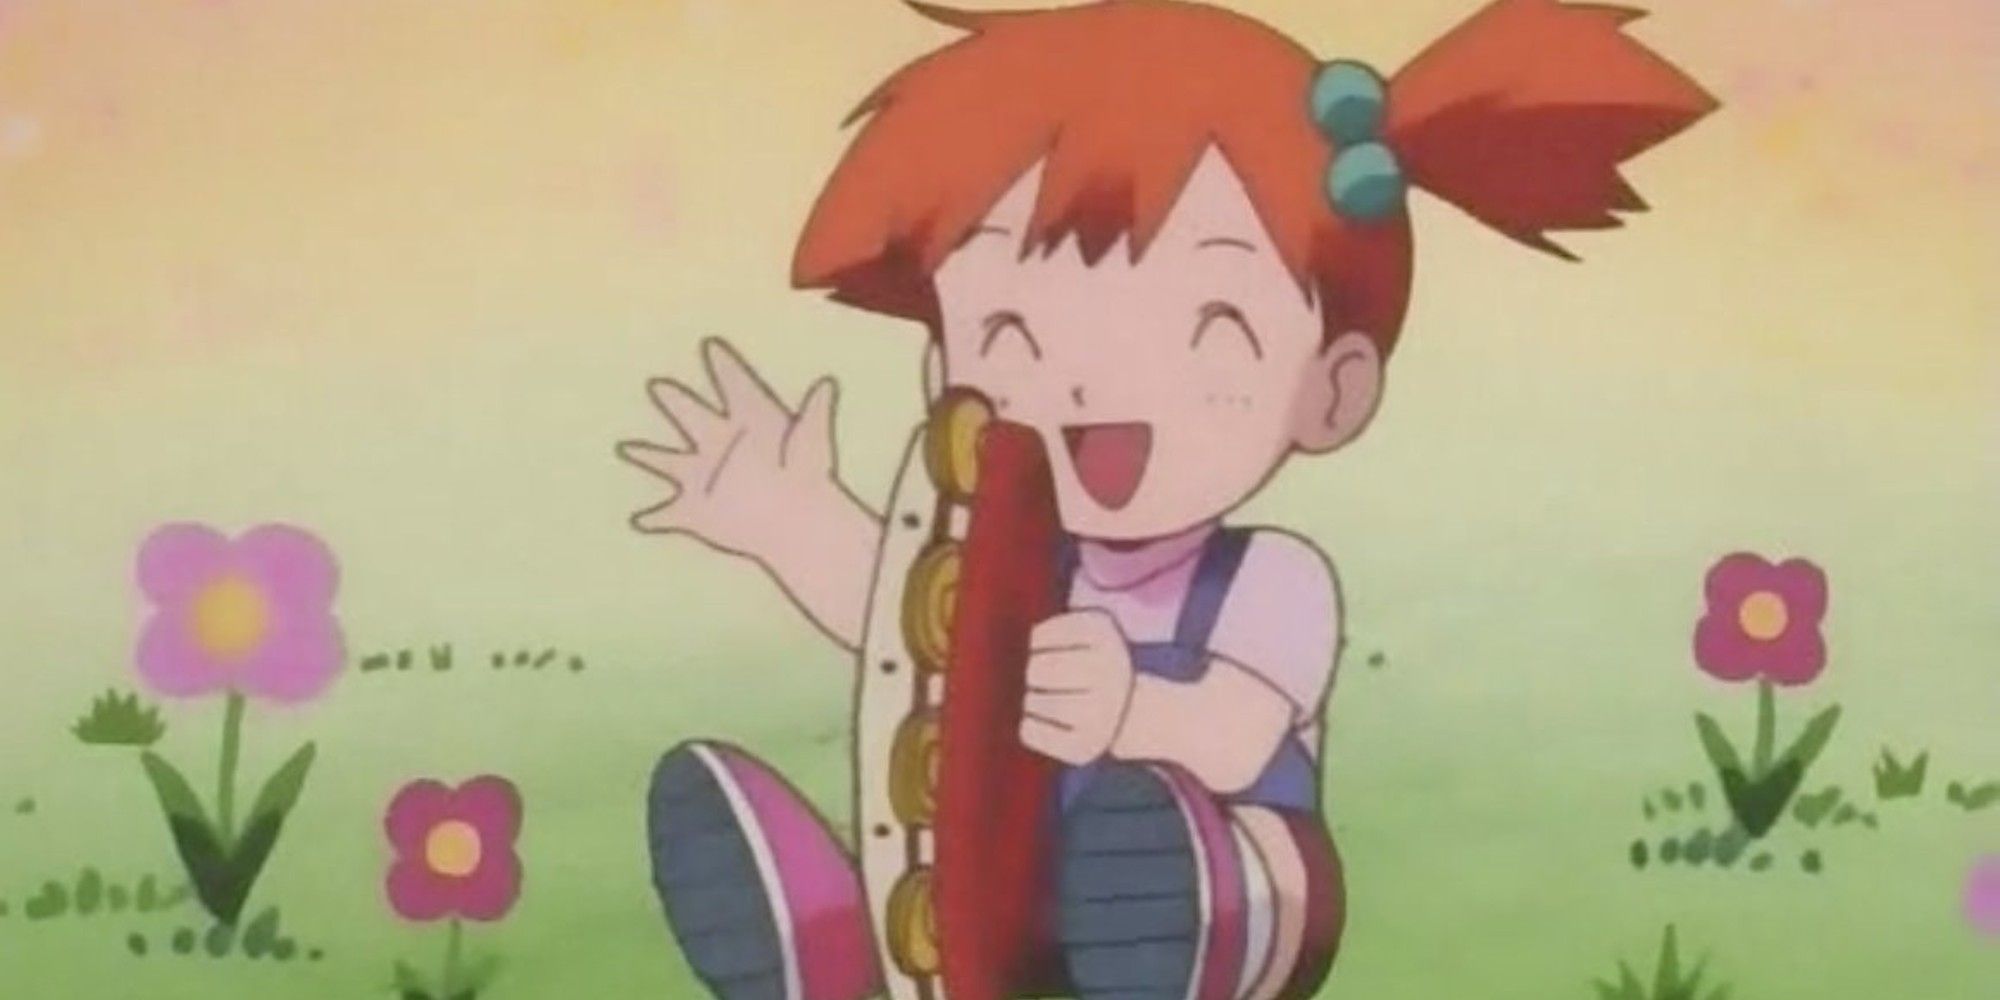 Toddler Misty from the Pokemon anime, sitting on a flower field, playing a tambourine